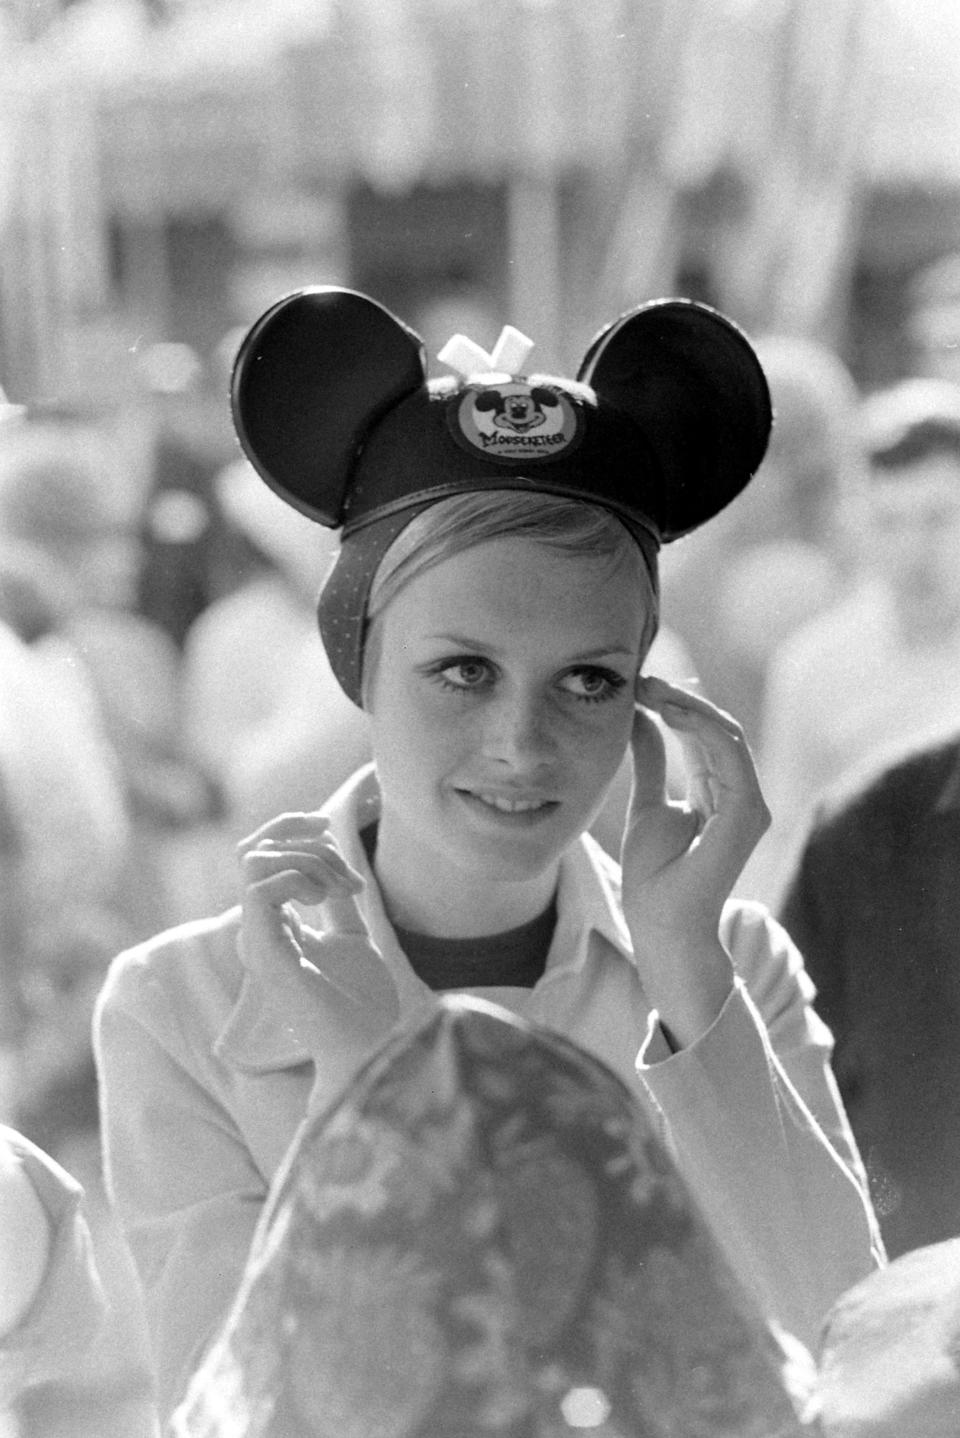 Model Twiggy wears mouse ears during a visit to&nbsp;Disneyland in 1967.